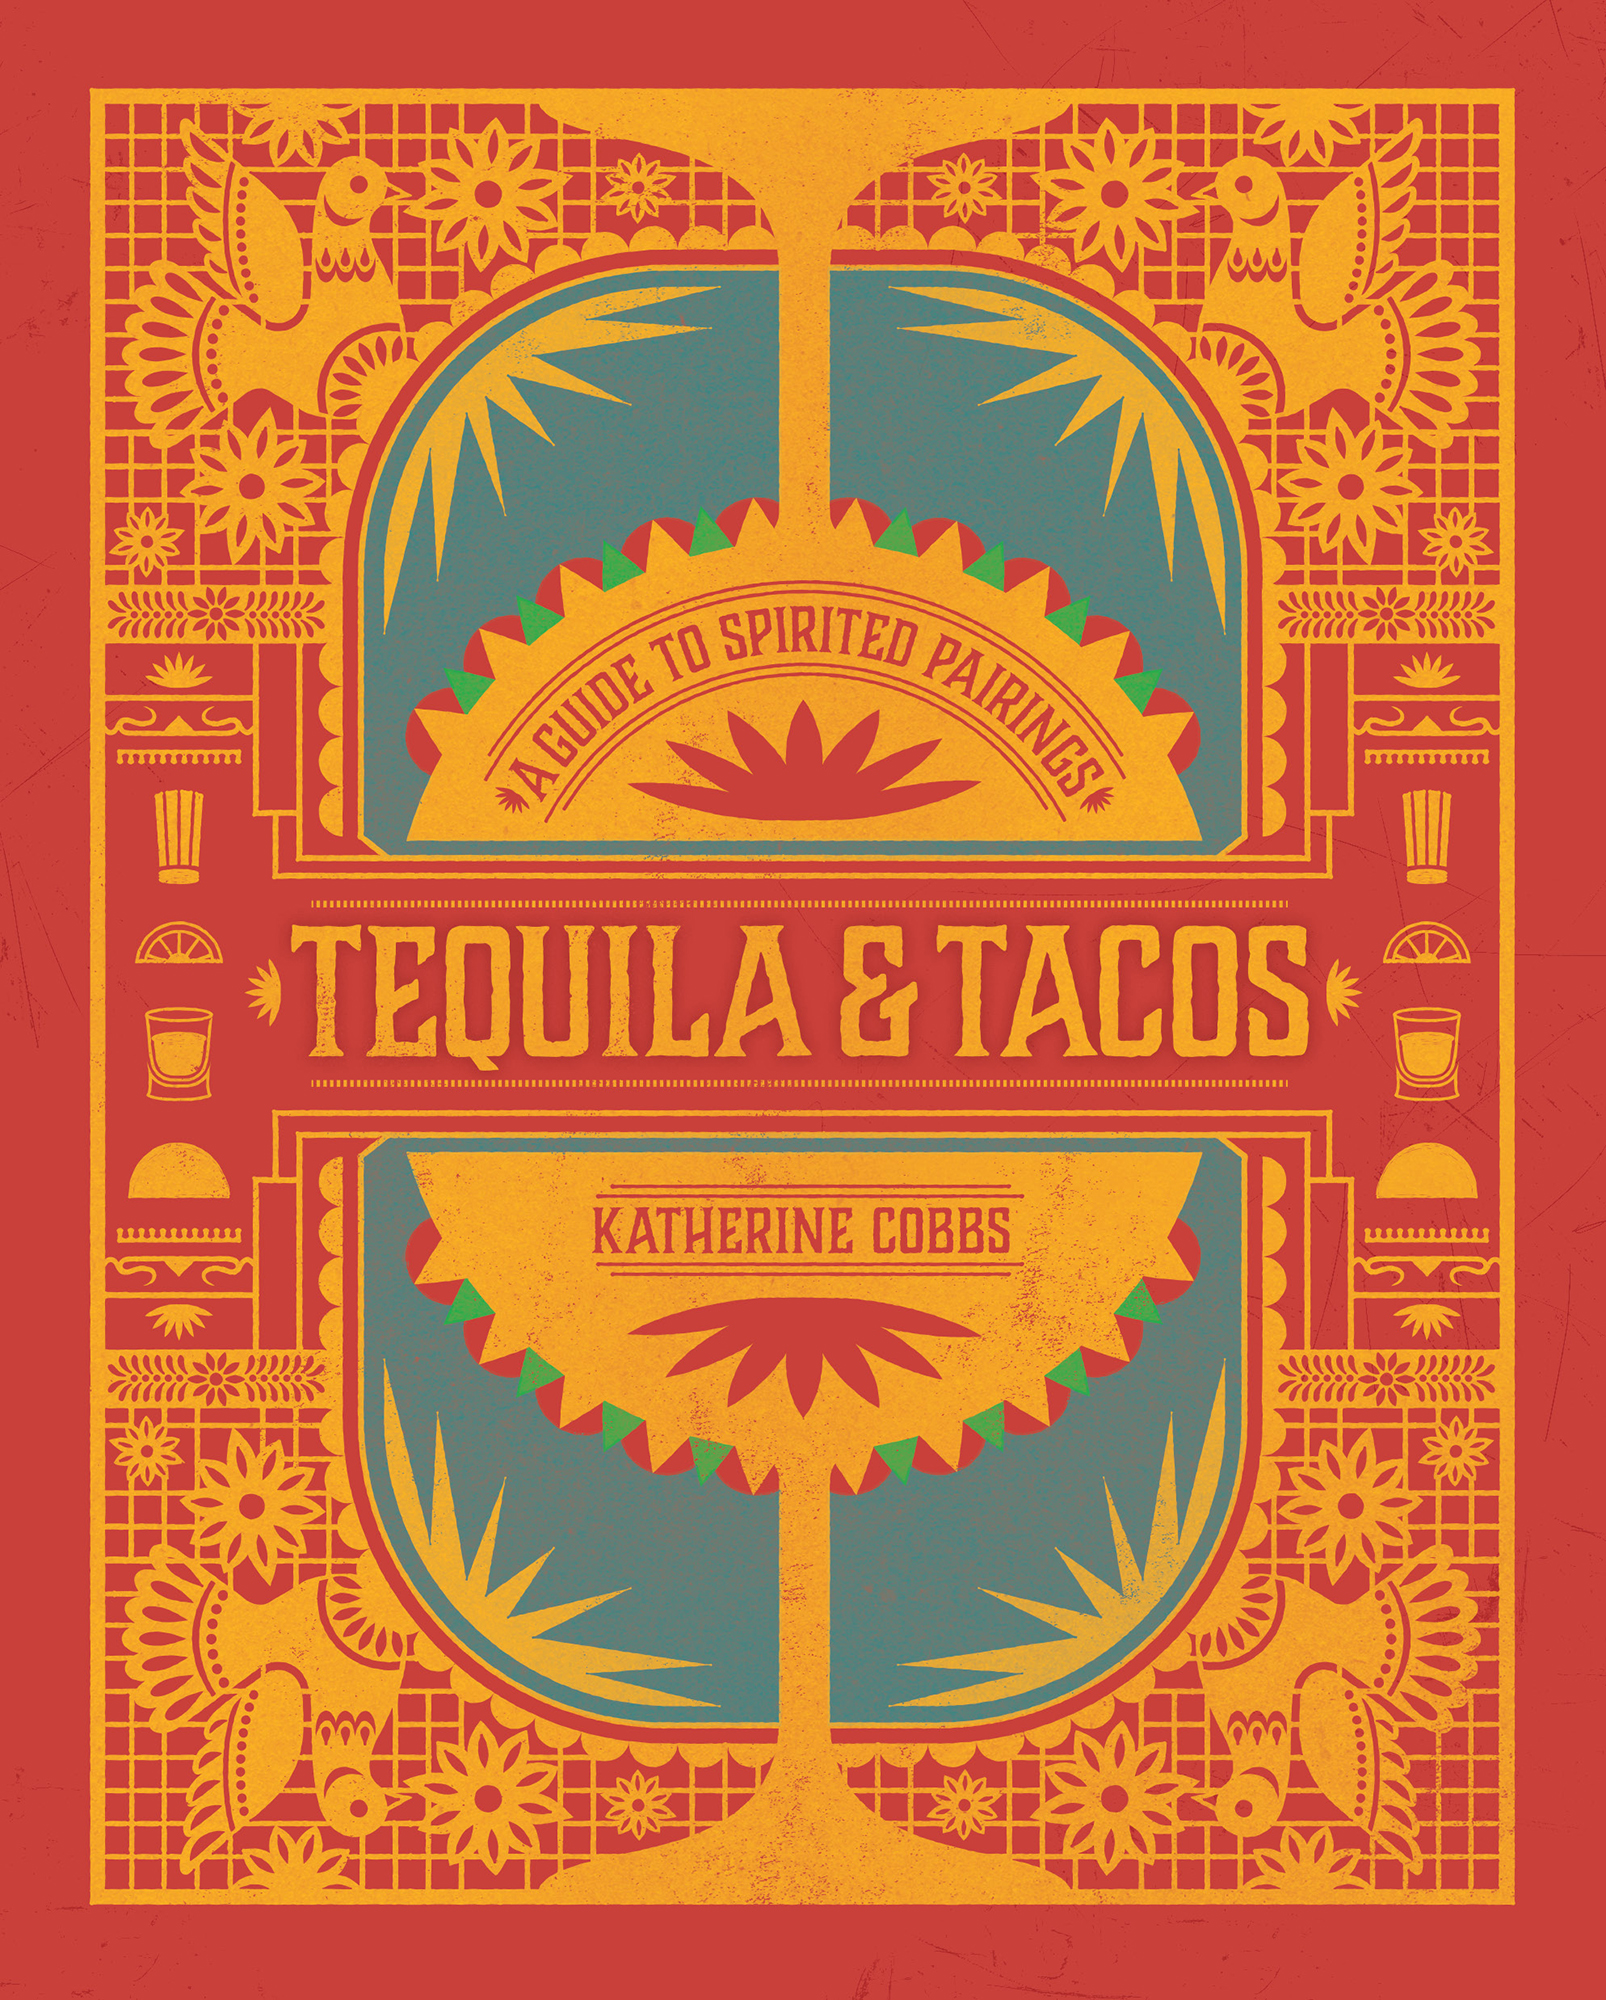 Tequila Tacos A Guide to Spirited Pairings - image 1